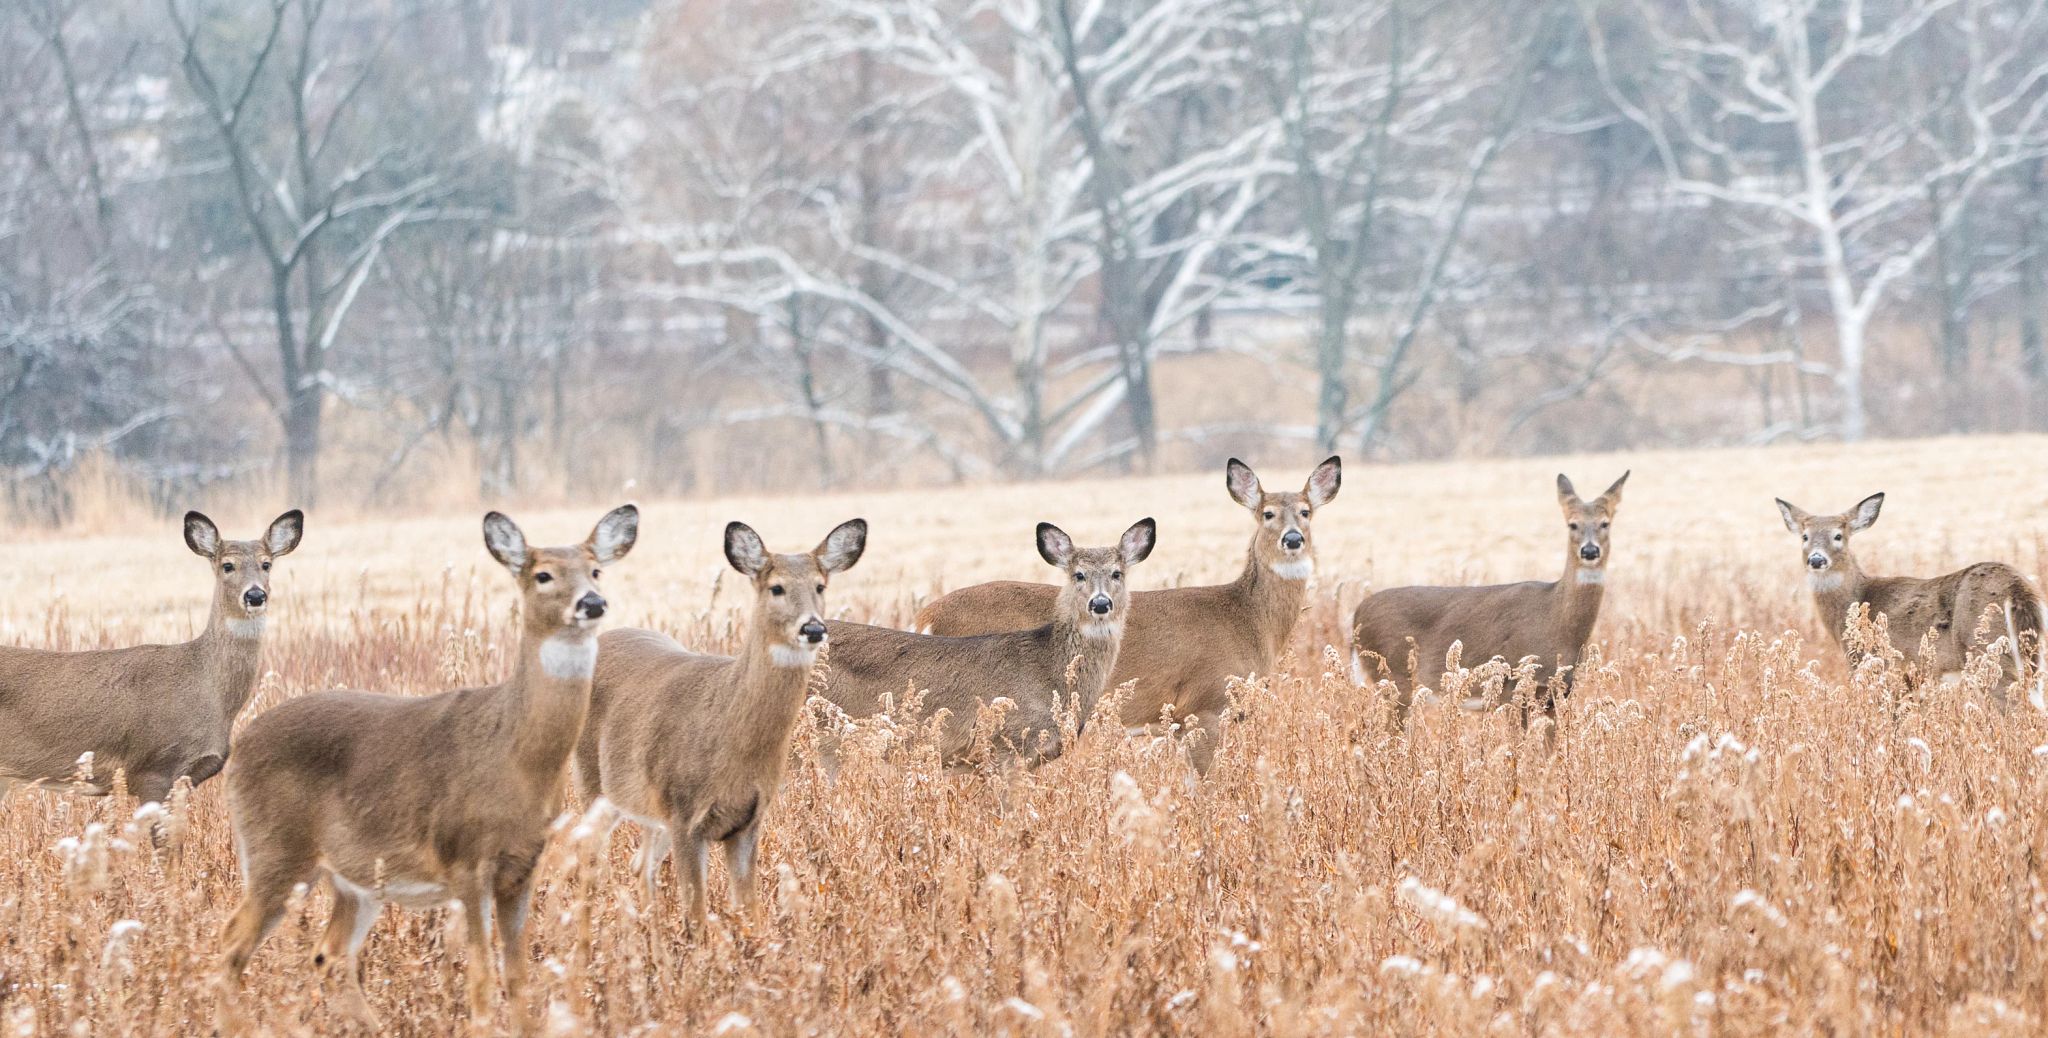 A herd of antlerless deer stand in a field of tall grass with trees that are lightly snow-covered in the background.